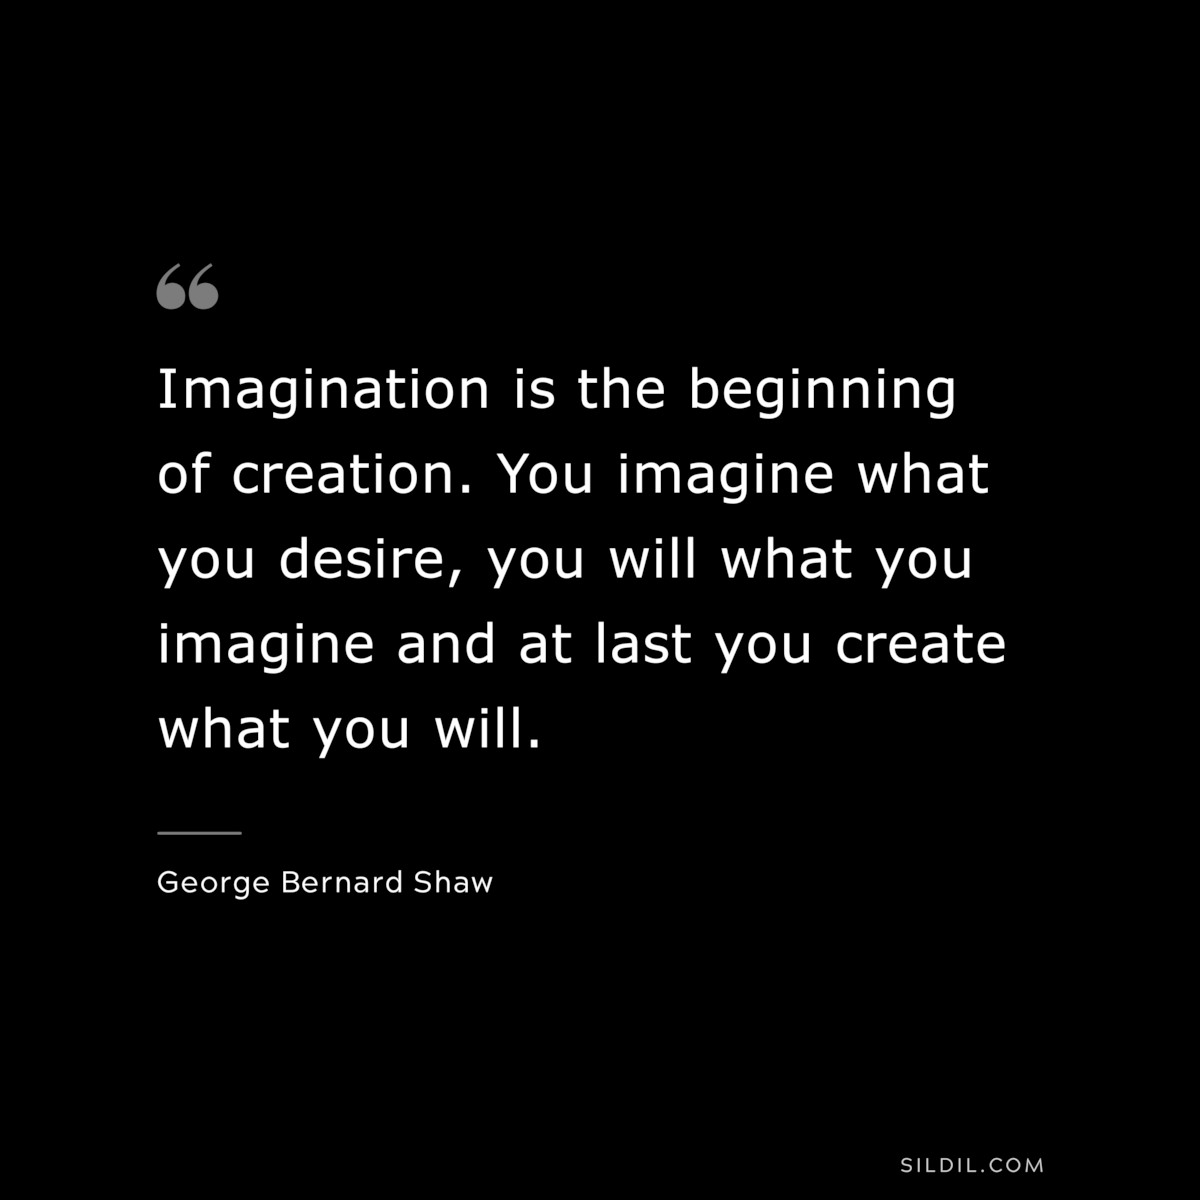 Imagination is the beginning of creation. You imagine what you desire, you will what you imagine and at last you create what you will. ― George Bernard Shaw